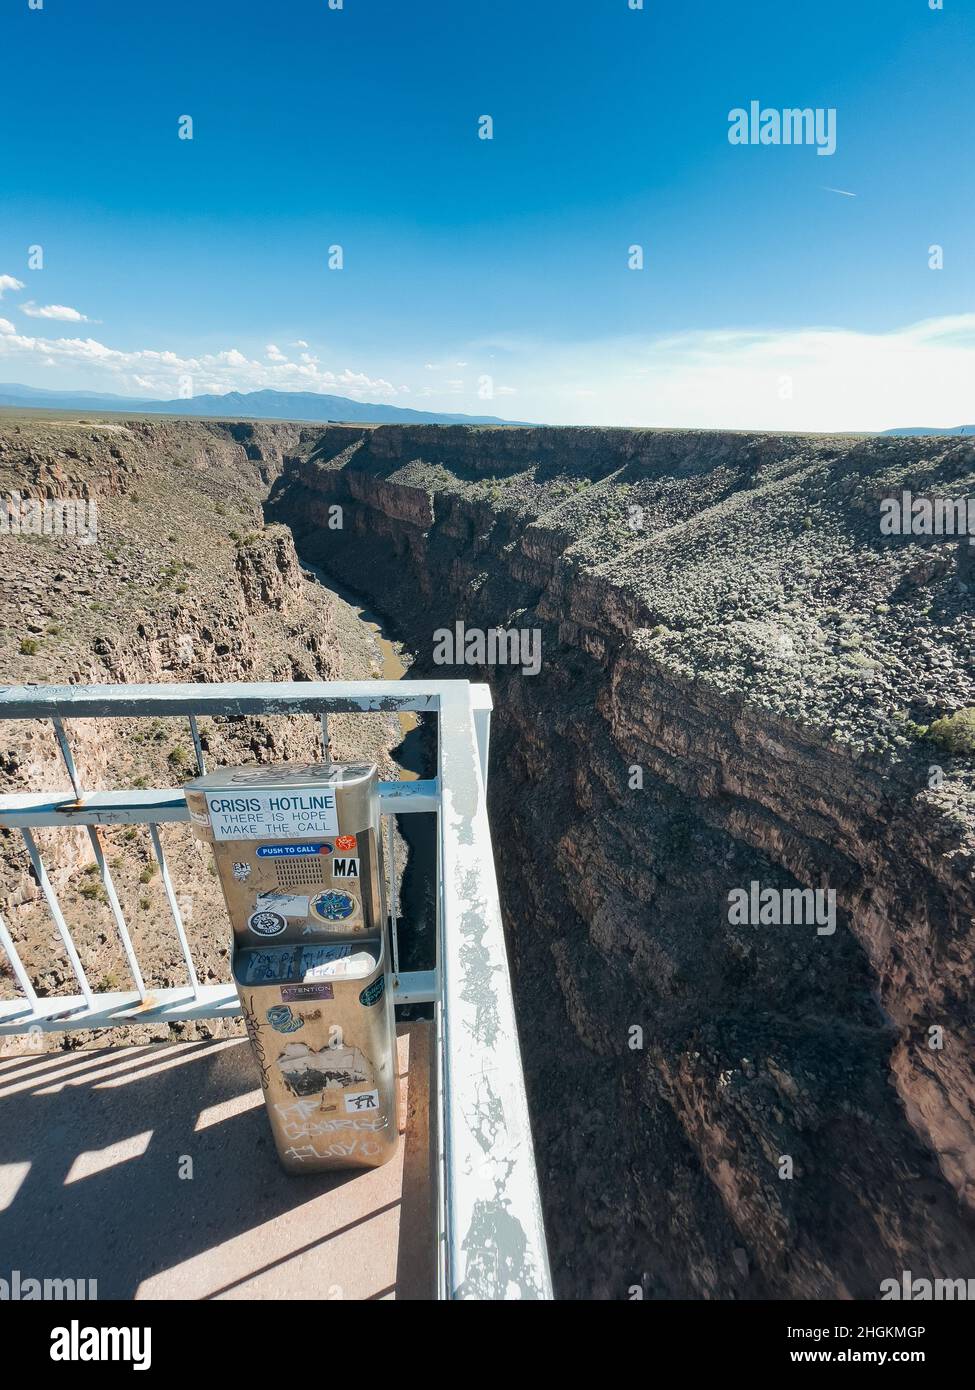 a crisis hotline phone installation on the Rio Grande Gorge Bridge, New Mexico, USA, to connect potential suicide victims with immediate assistance Stock Photo